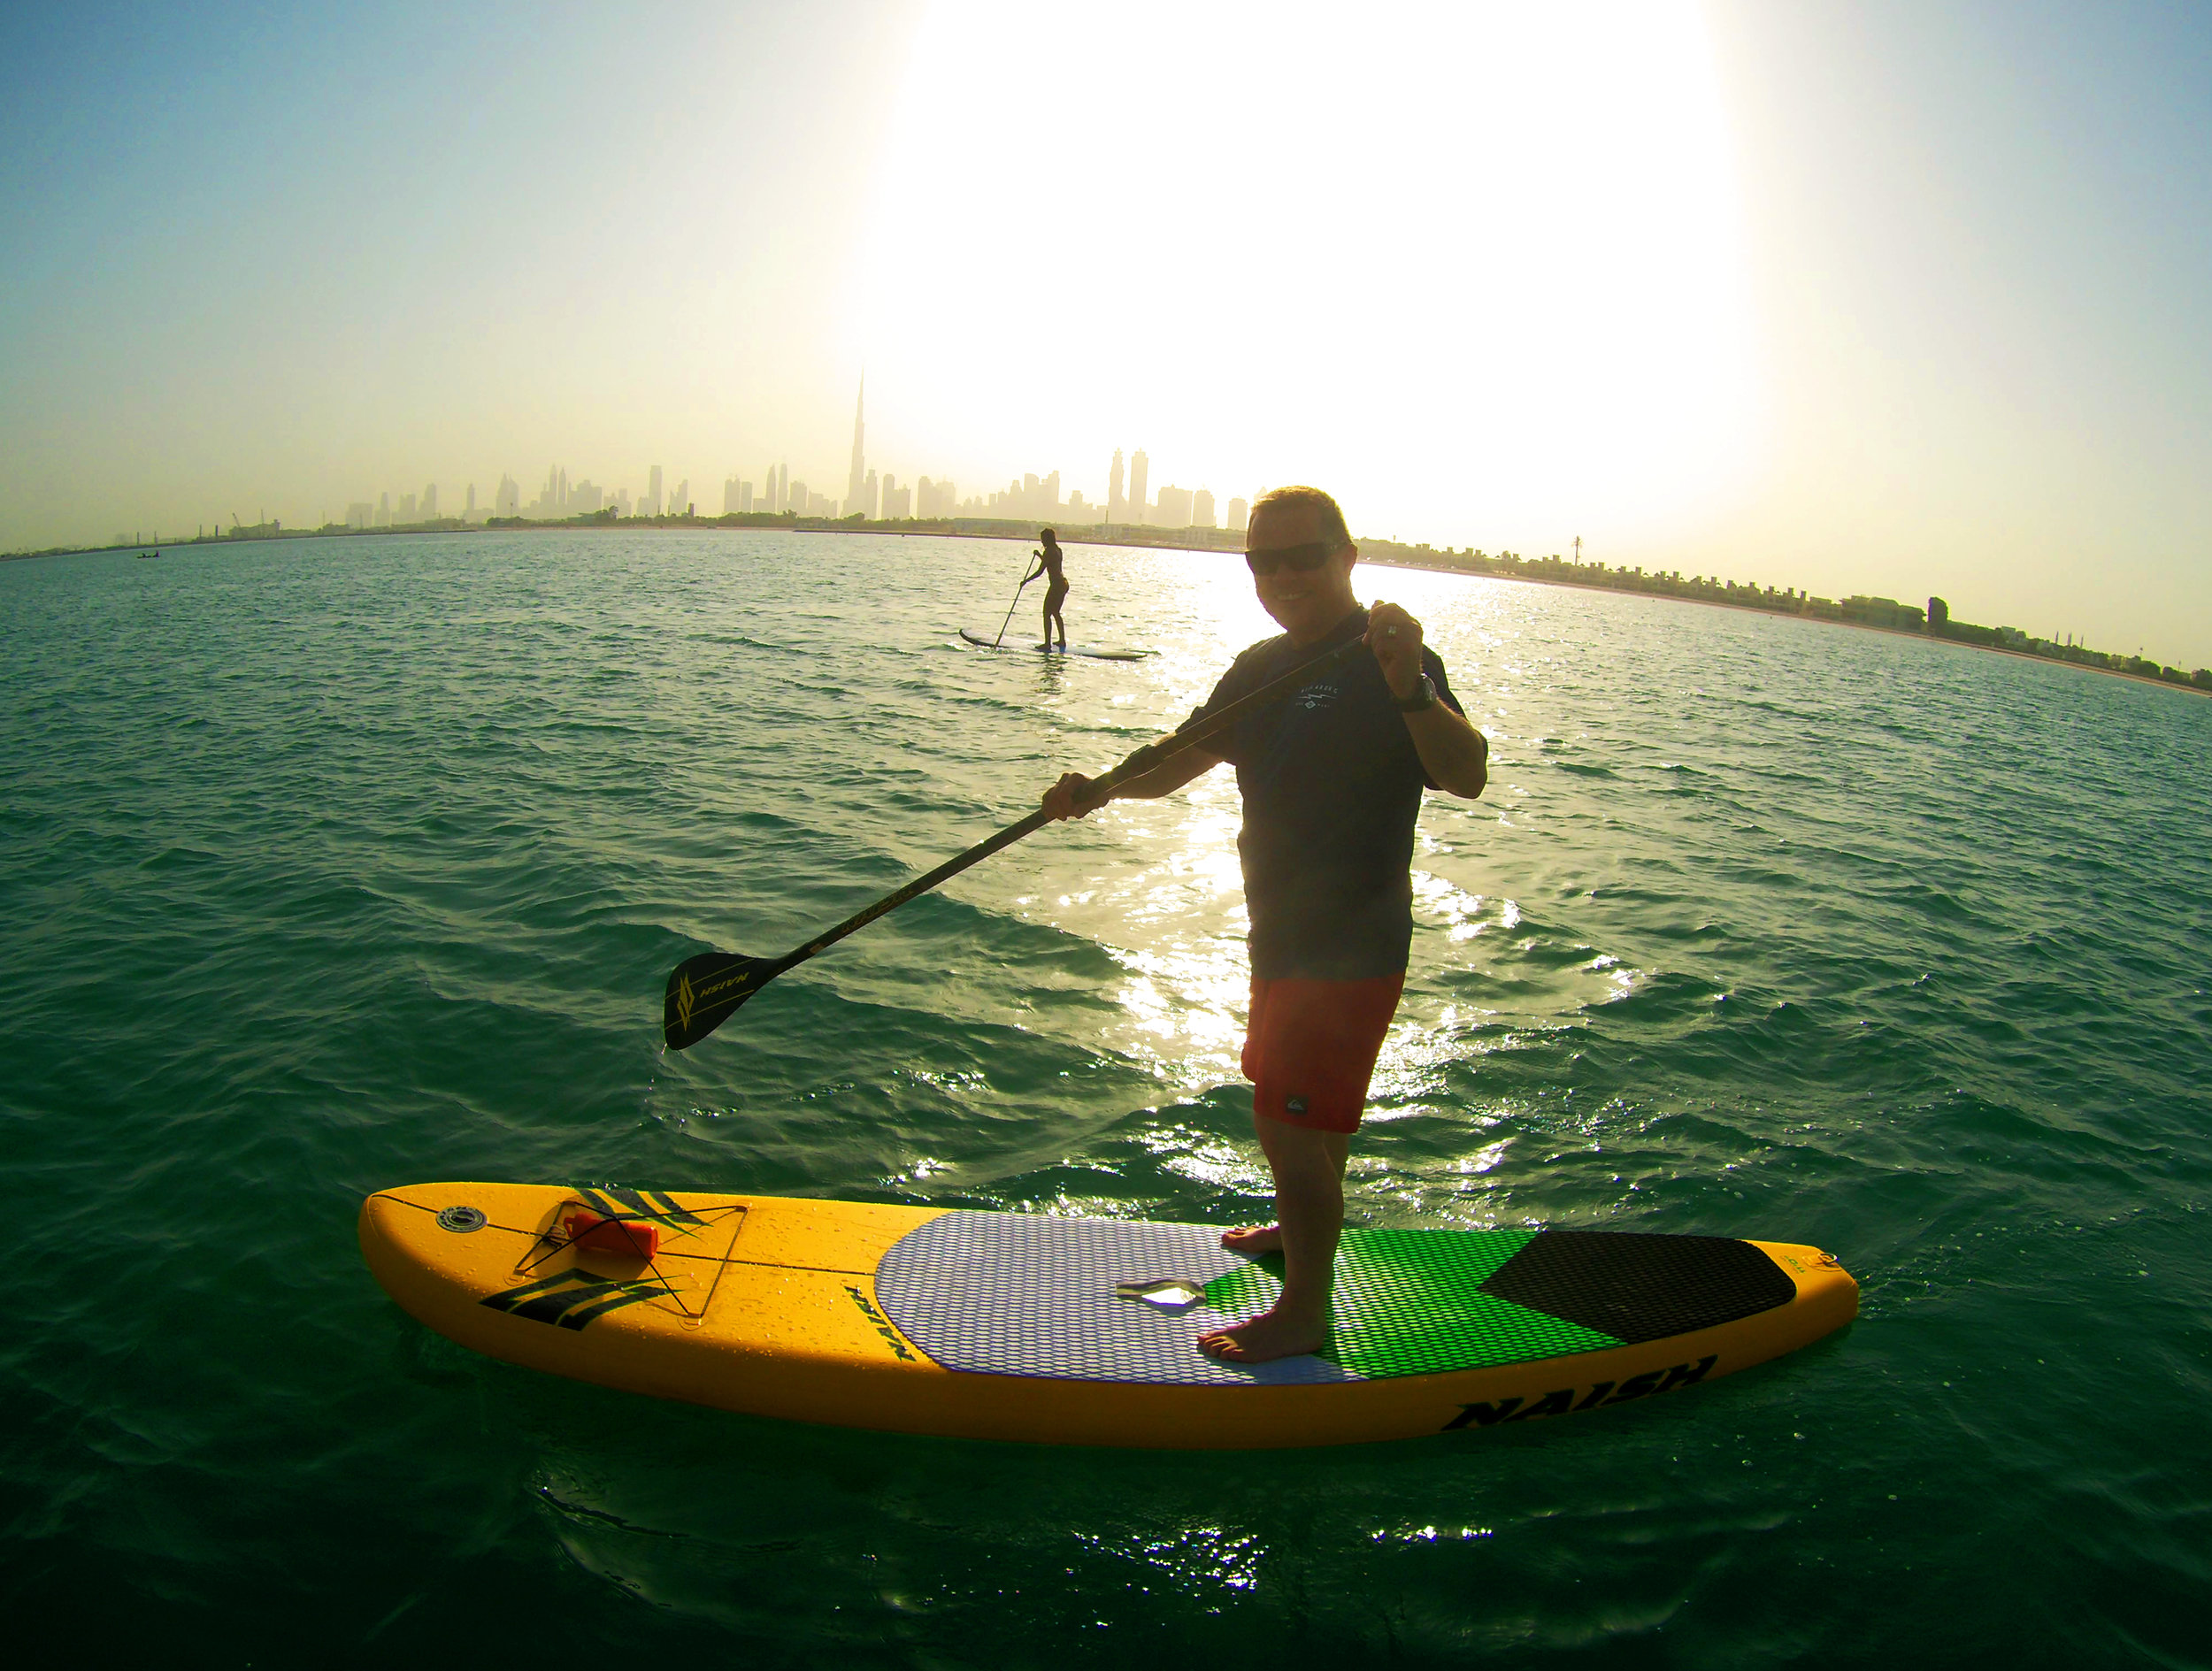 Toby on the SUP with girl in background.jpg